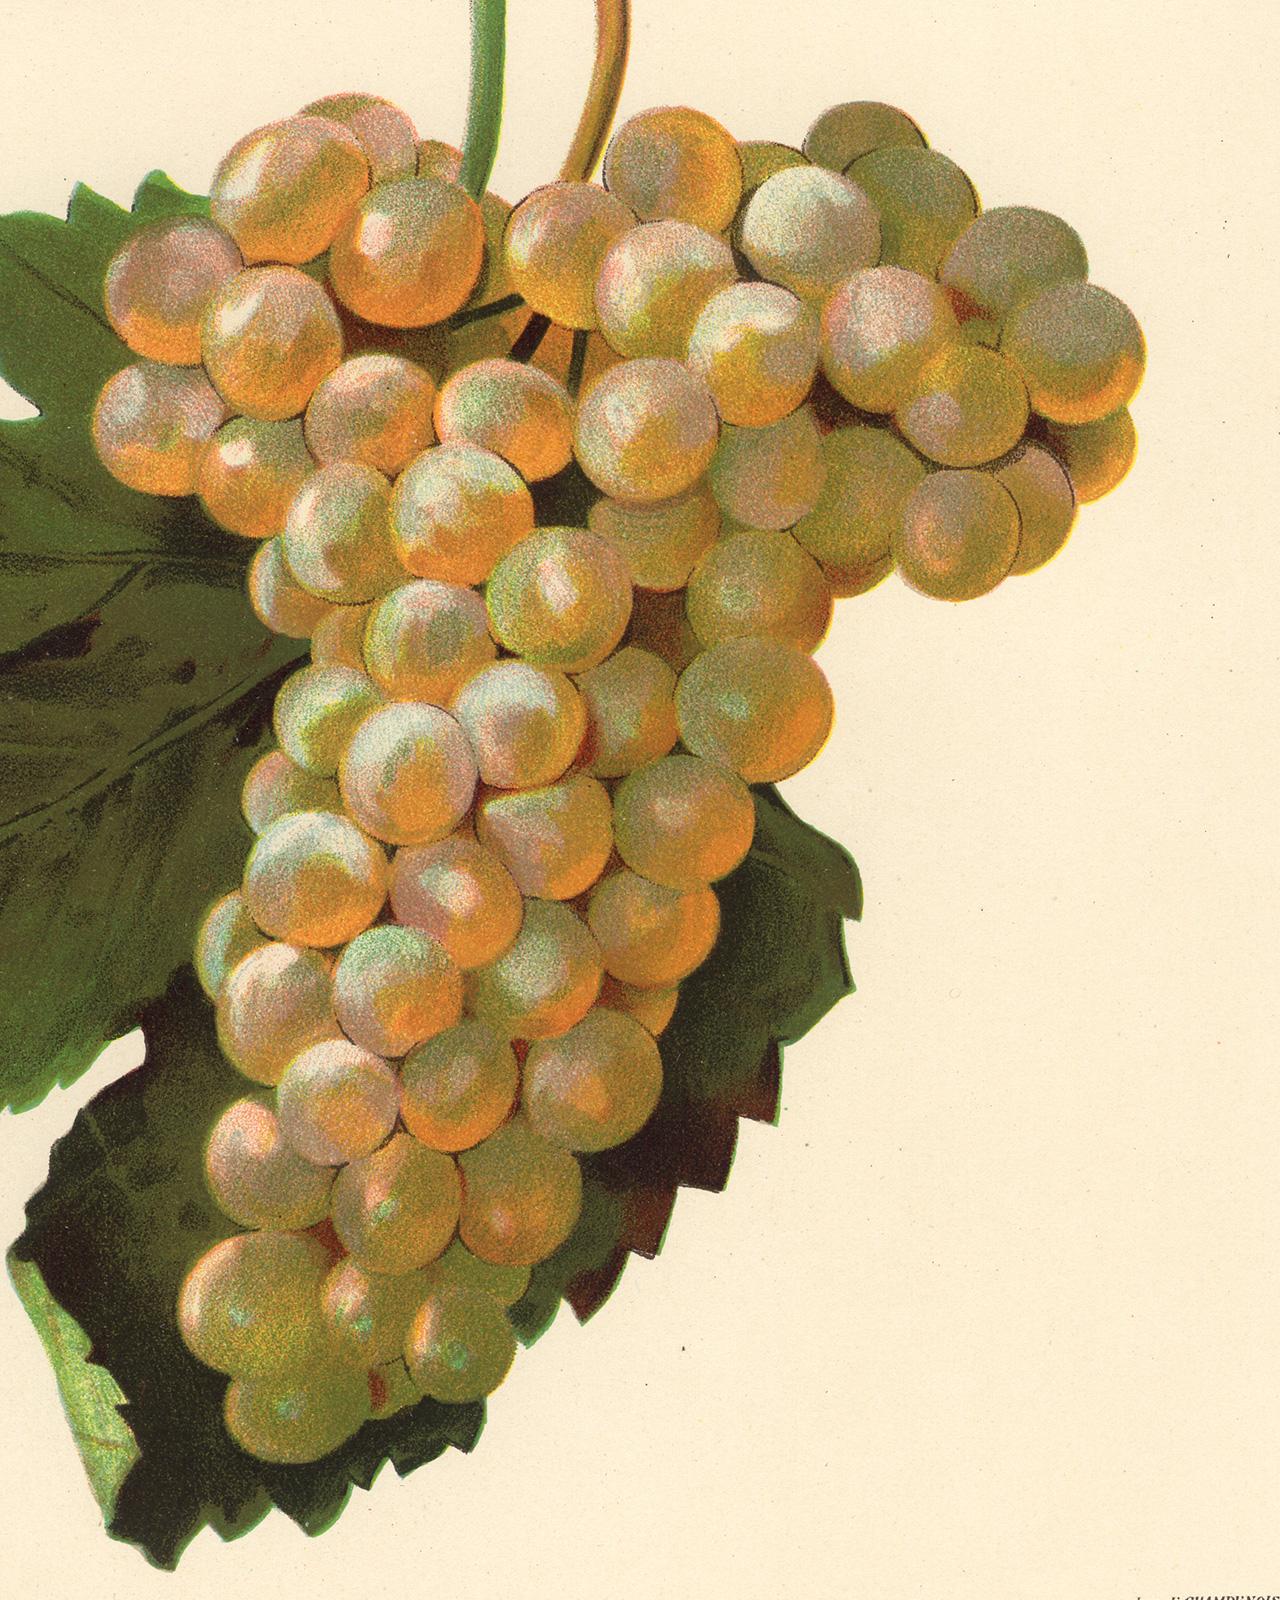 Verdat Blanc grape - from Ampelography by Vermorel - Lithograph - Early 20th c. - Contemporary Print by Victor Vermorel